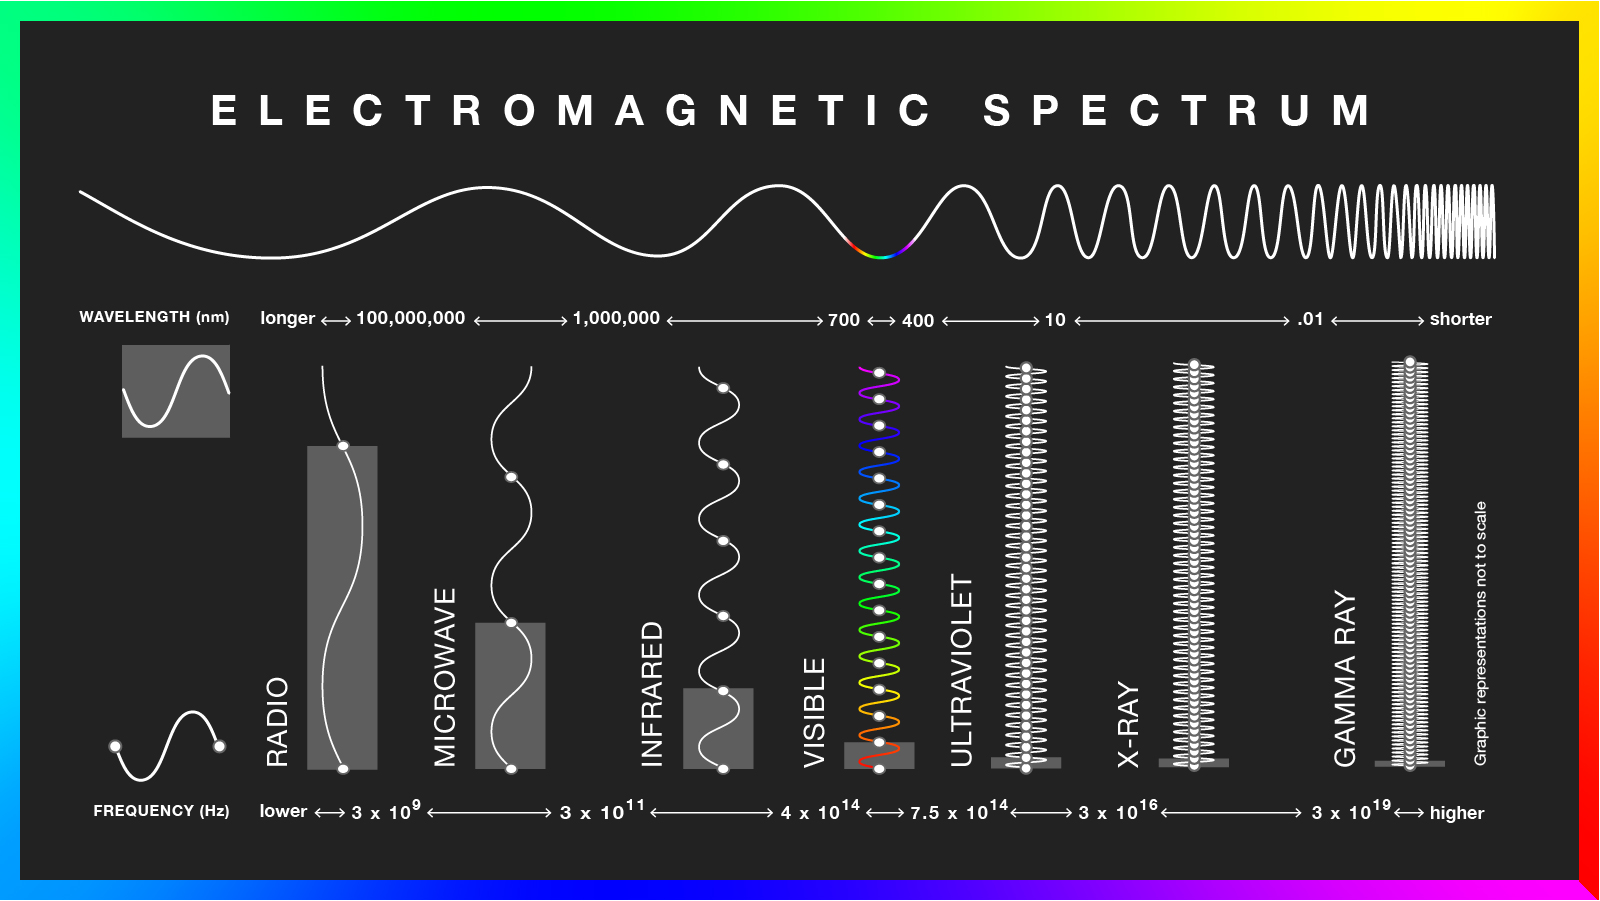 Each type of wave on the electromagnetic spectrum is represented with a wavy line. Each wave – radio, microwave, infrared, visible, ultraviolet, x-ray, and gamma ray – is between a range of wavelengths that get shorter (from >100,000,000 nm to <.01 nm) and frequencies that get higher (from <3x10^9 to >3x10^19 Hz) from left to right. Visible light makes up a relatively tiny portion of the full spectrum.